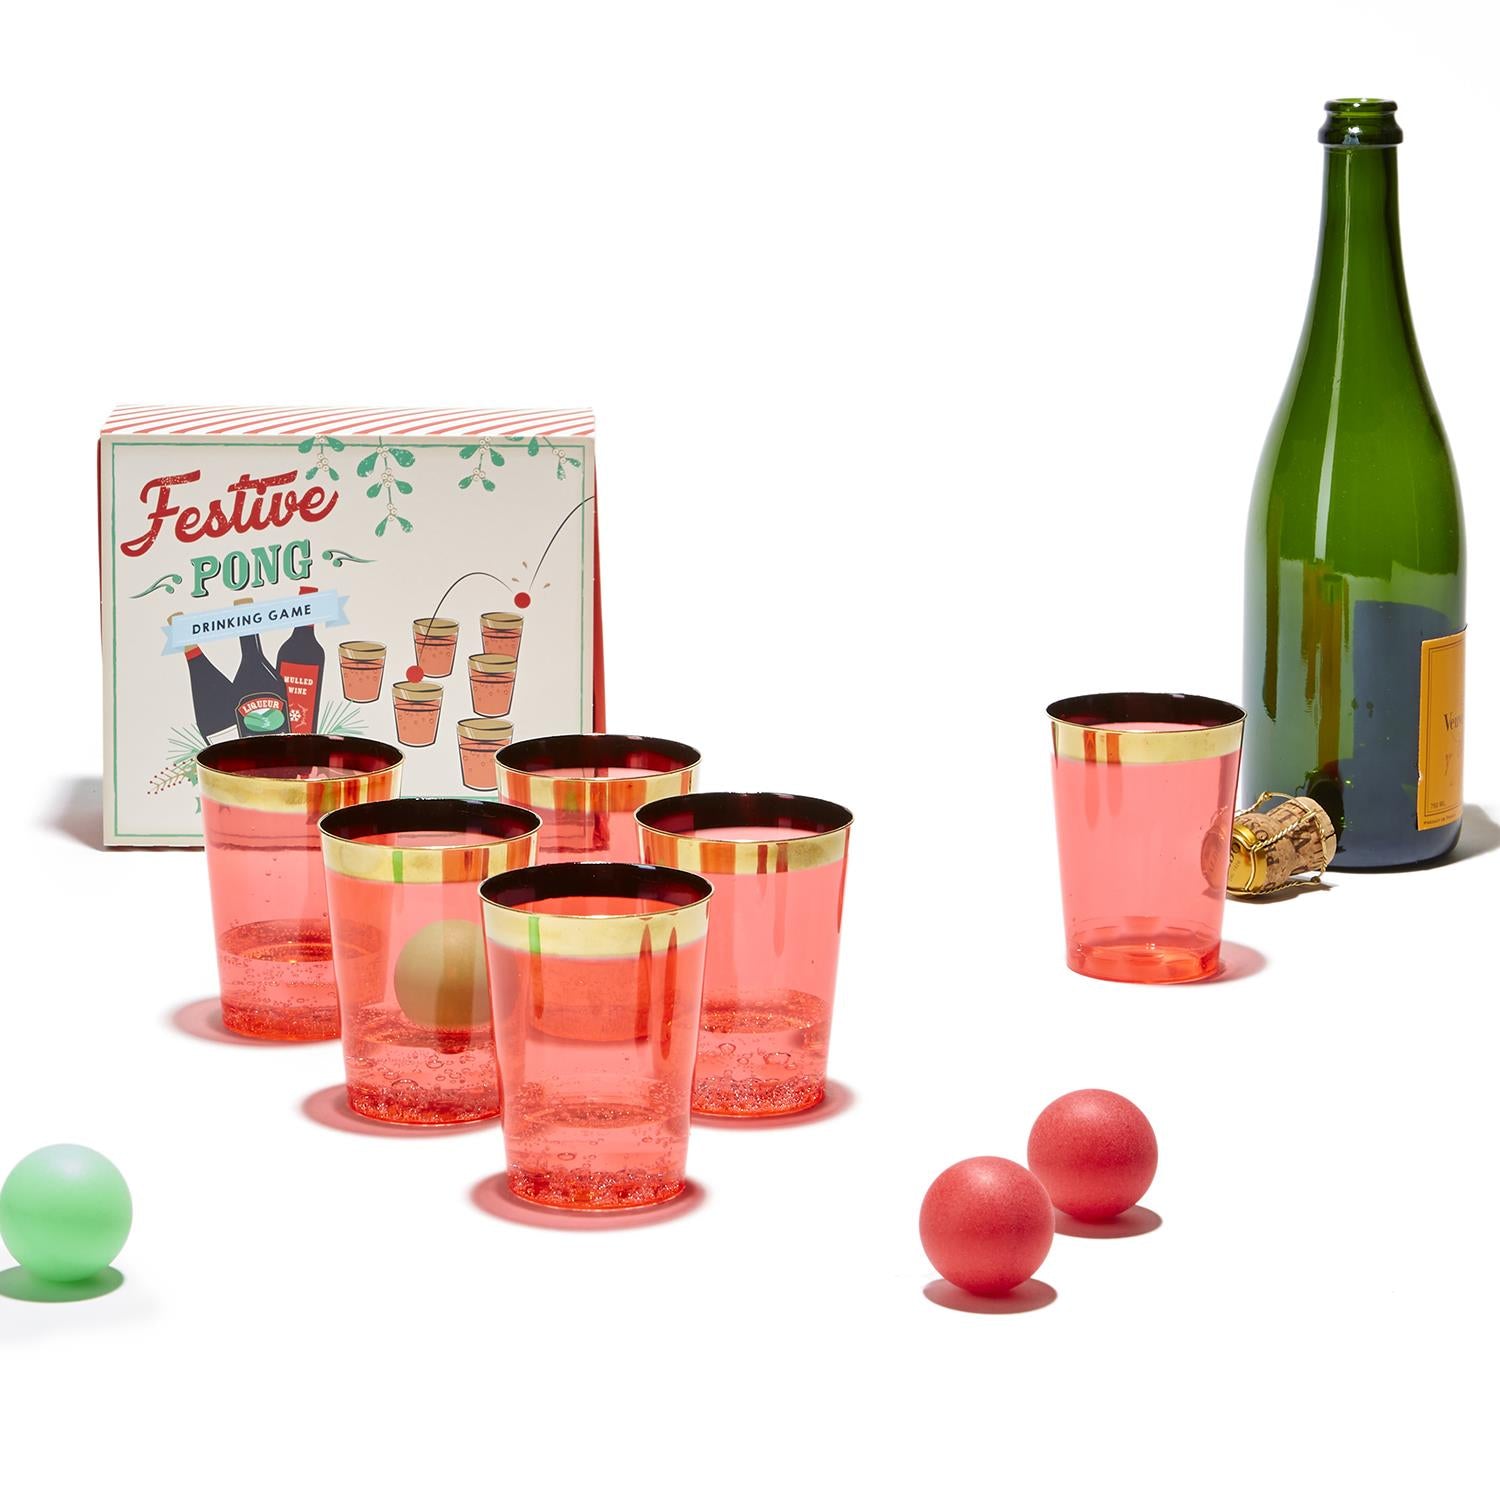 It's time for some holiday fun with this festive pong game. It is great to bring a bit of fun to your Christmas parties. Simply fill the plastic glasses with your favorite Christmas beverage and let the games begin!  Contains 12 plastic glasses 2 x red, 2 x green ping pong balls For two teams Let the games begin!